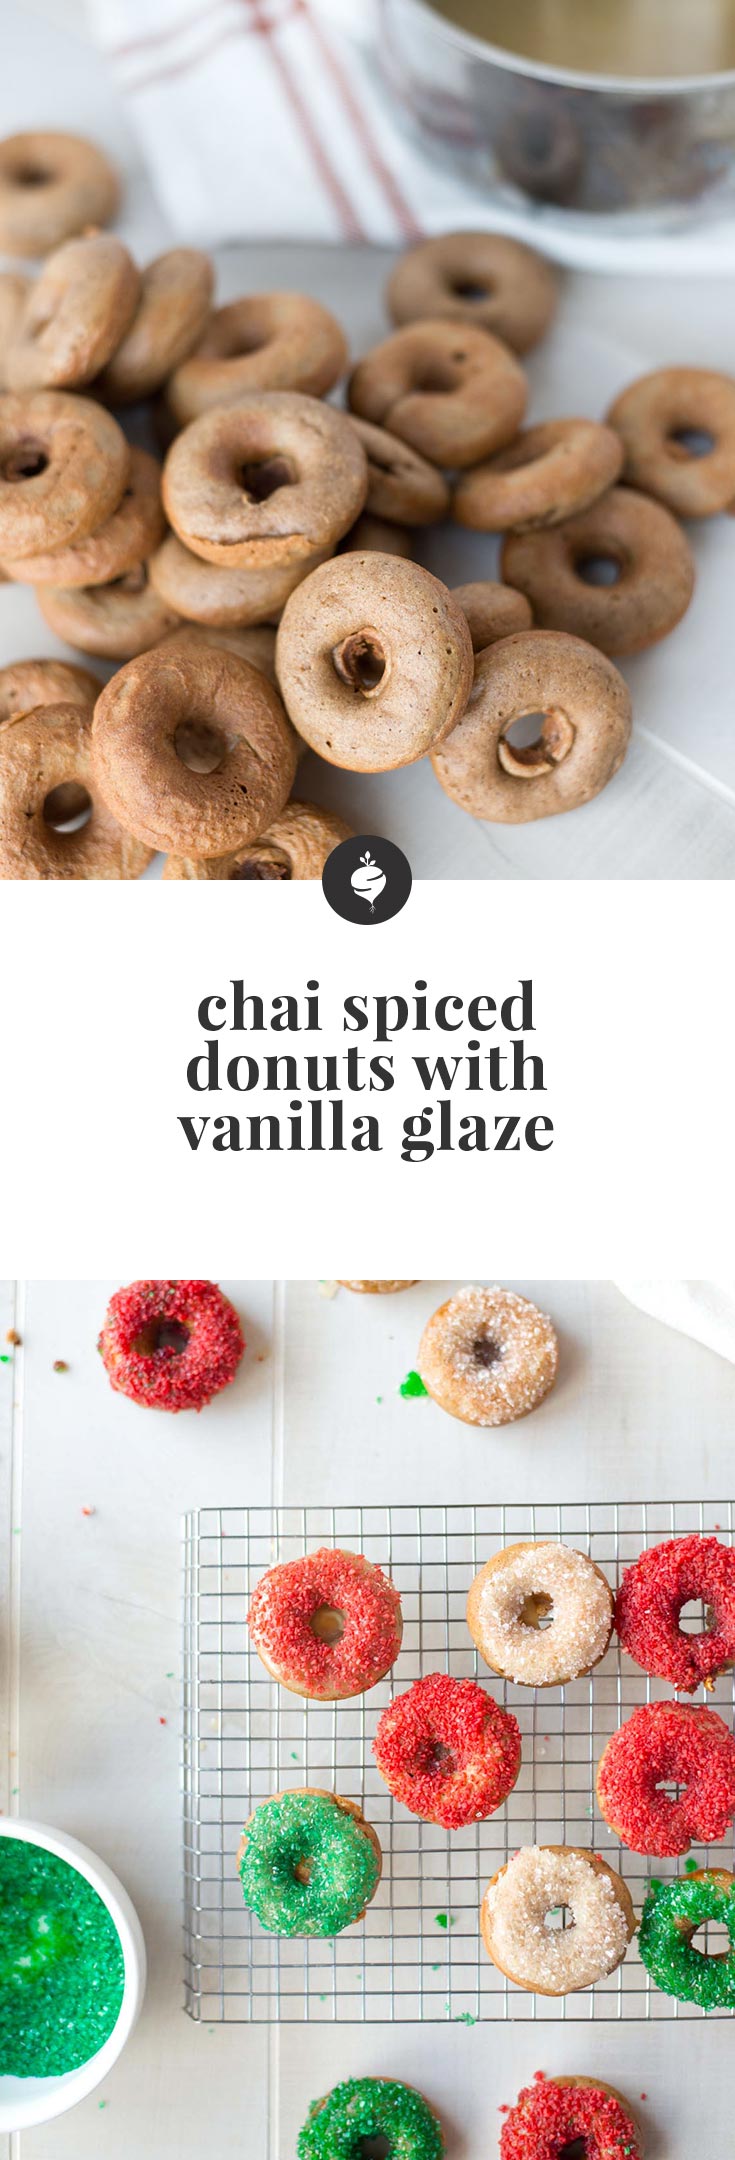 Quick, easy and delicious chai spiced paleo donuts made in less than 20 minutes.